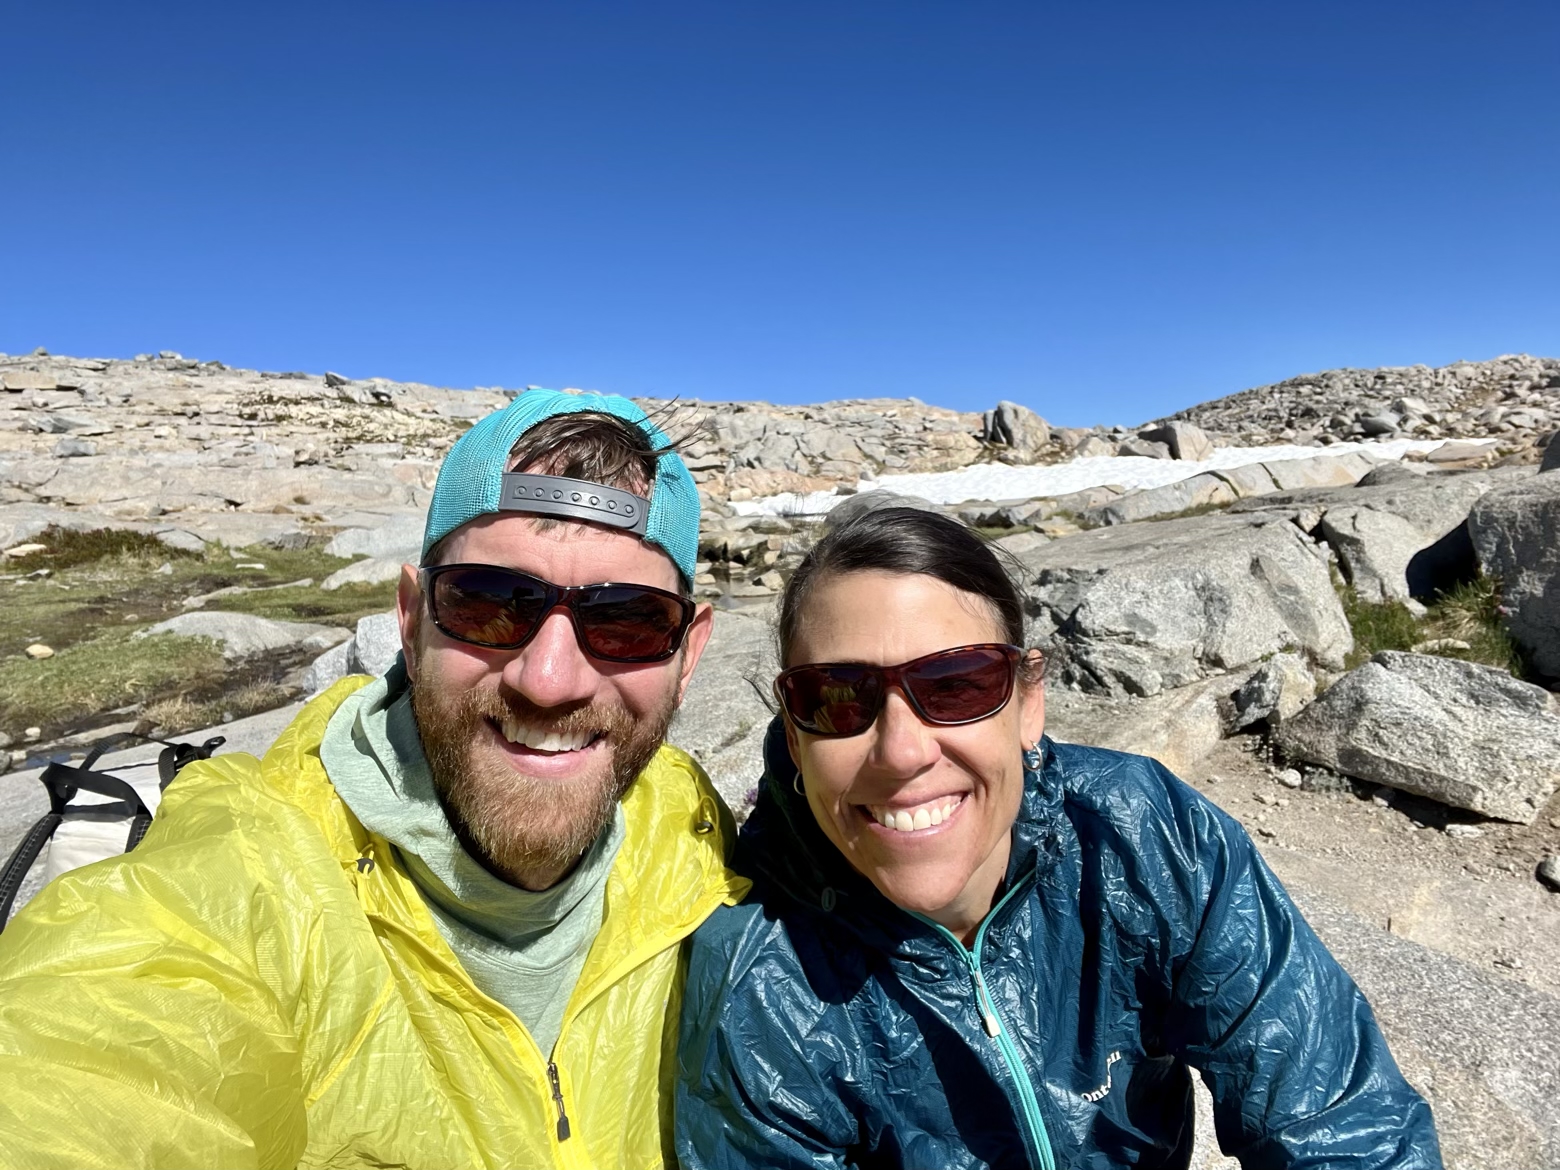 Plenty to smile about on Donohue Pass